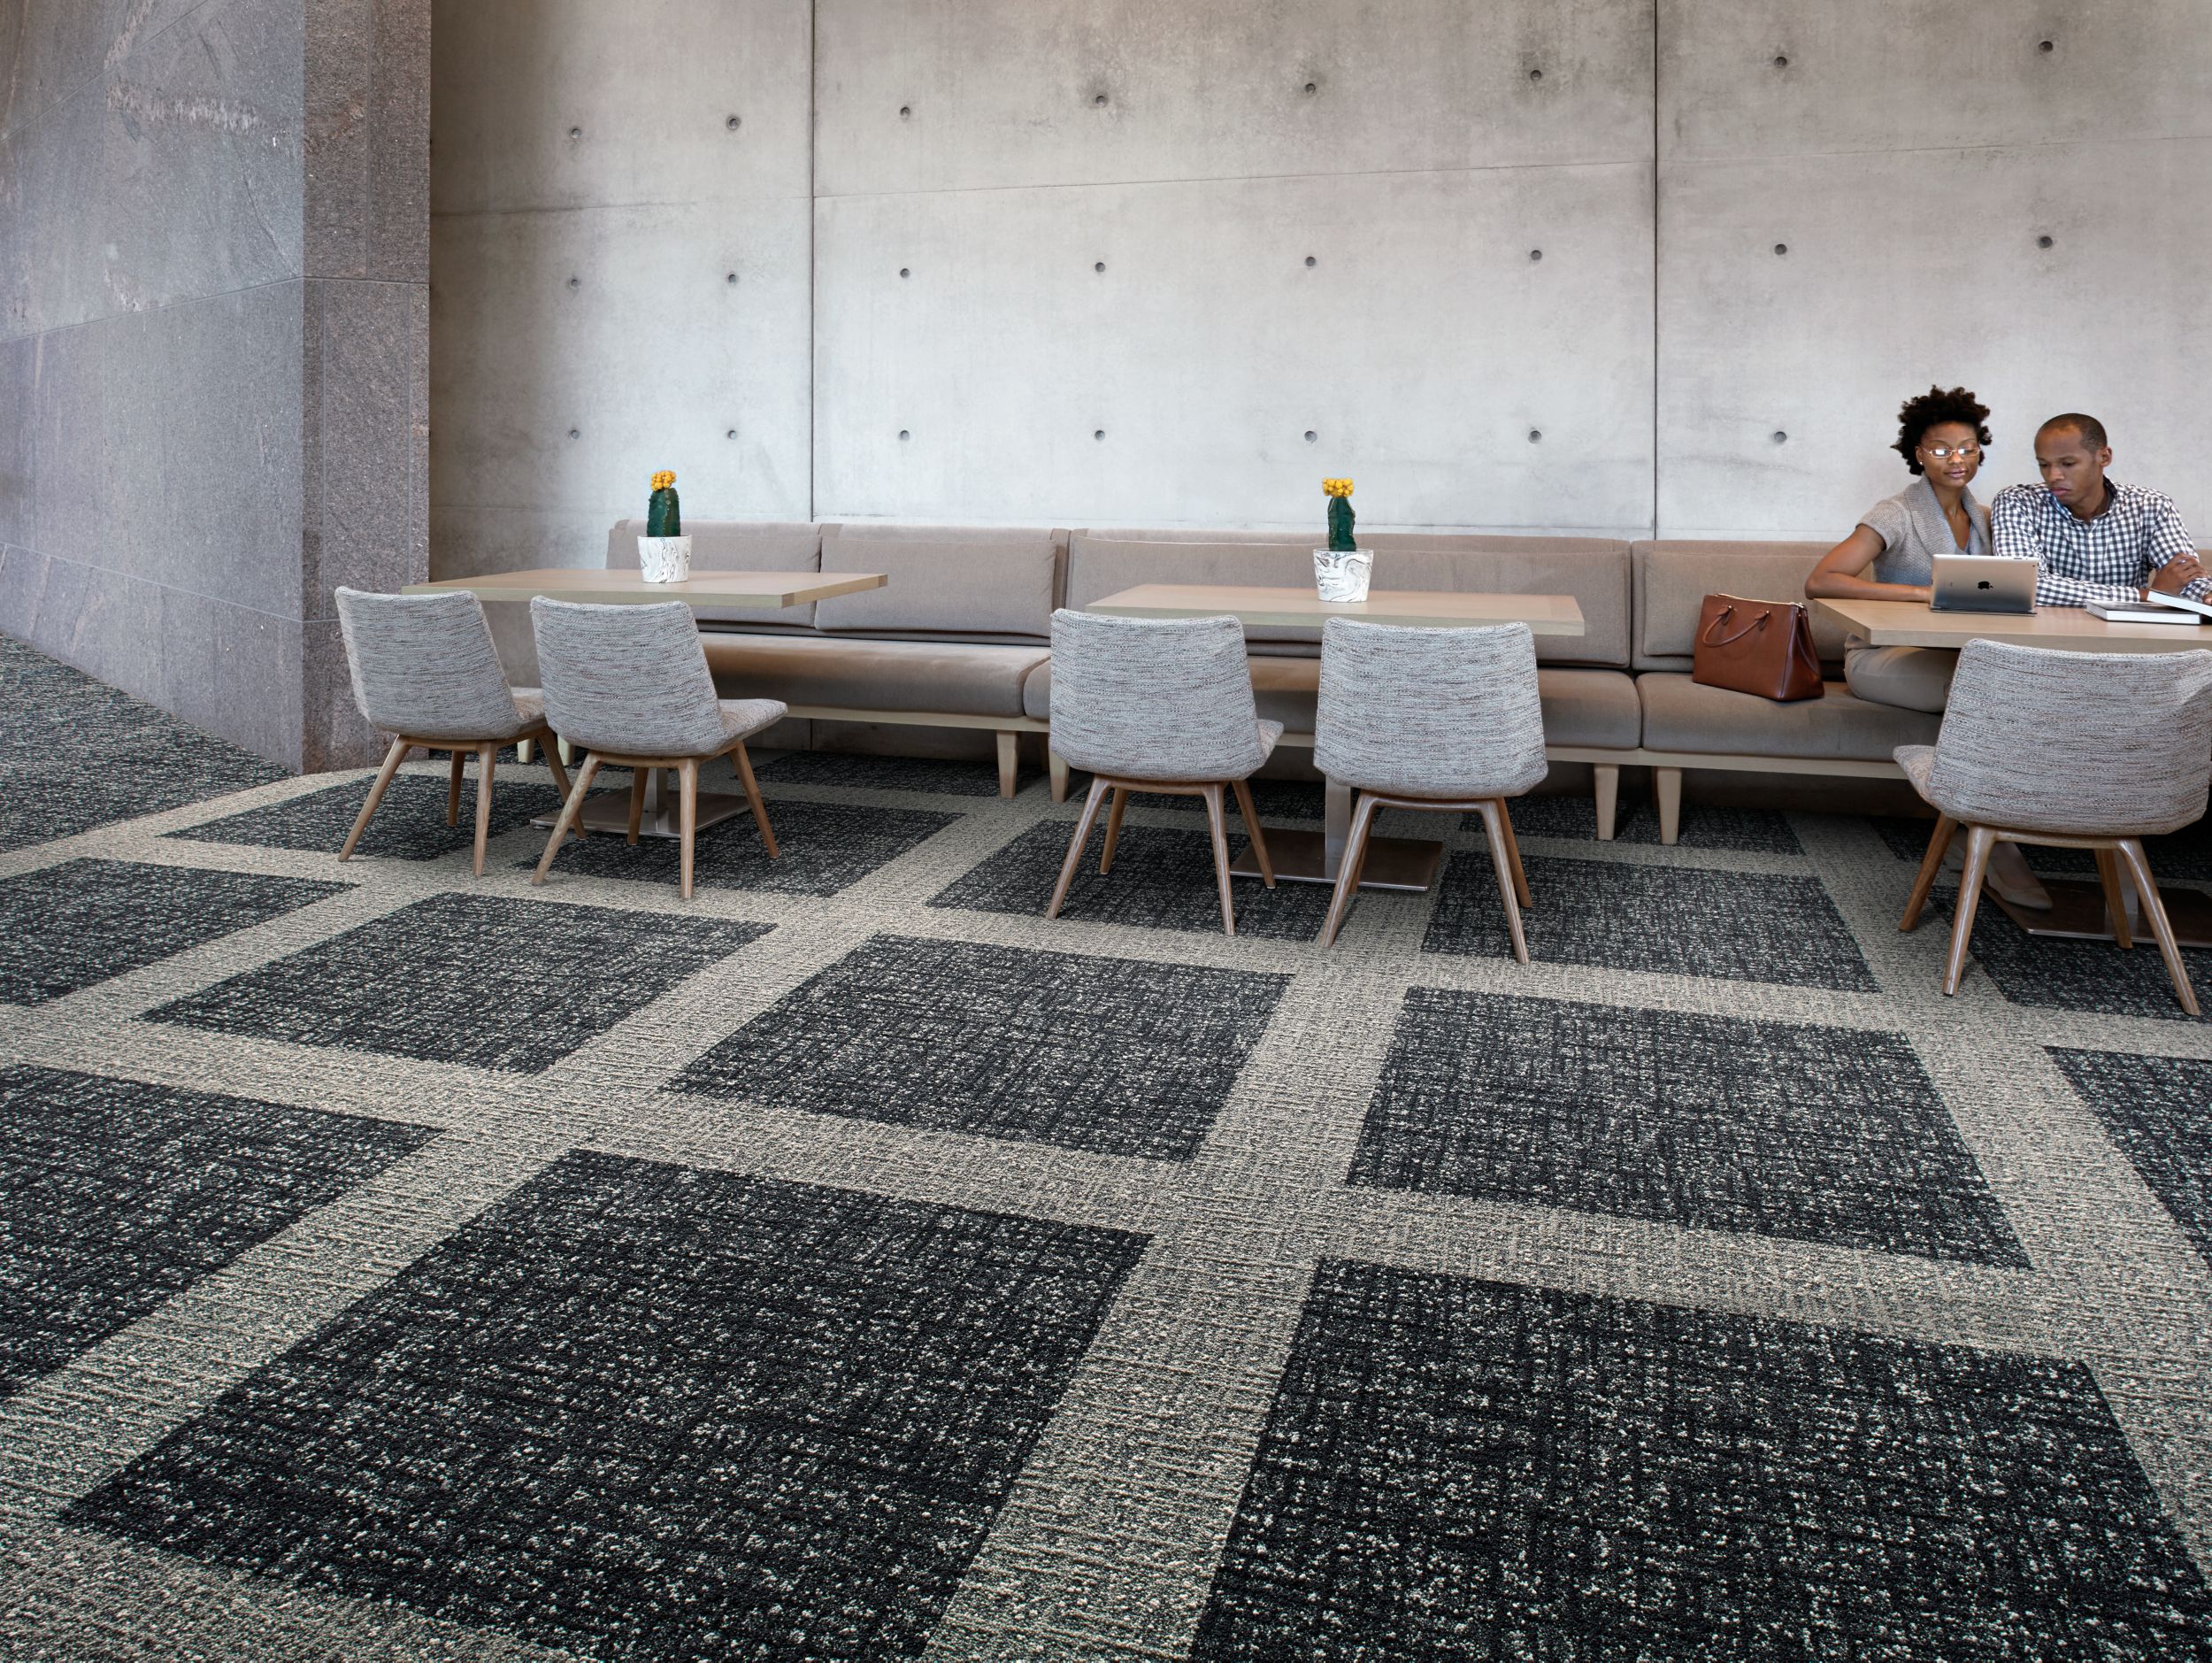 Interface WW895 plank carpet tile and Textured Woodgrains LVT in office common area with tables and chairs imagen número 6